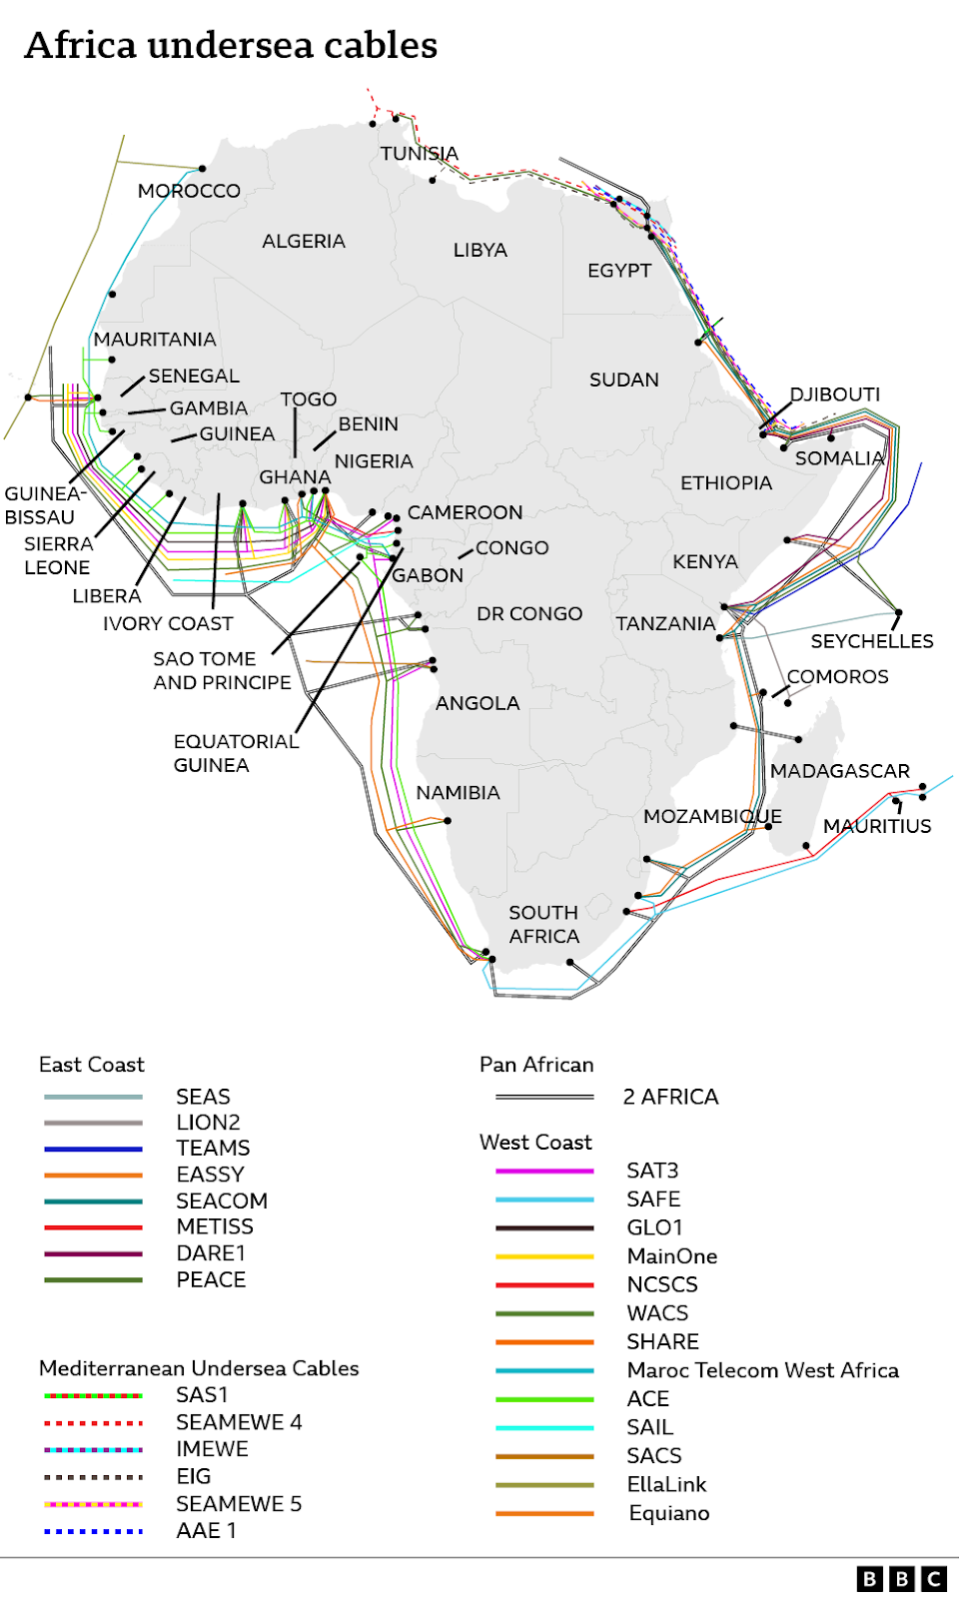 A map of the African internet cables